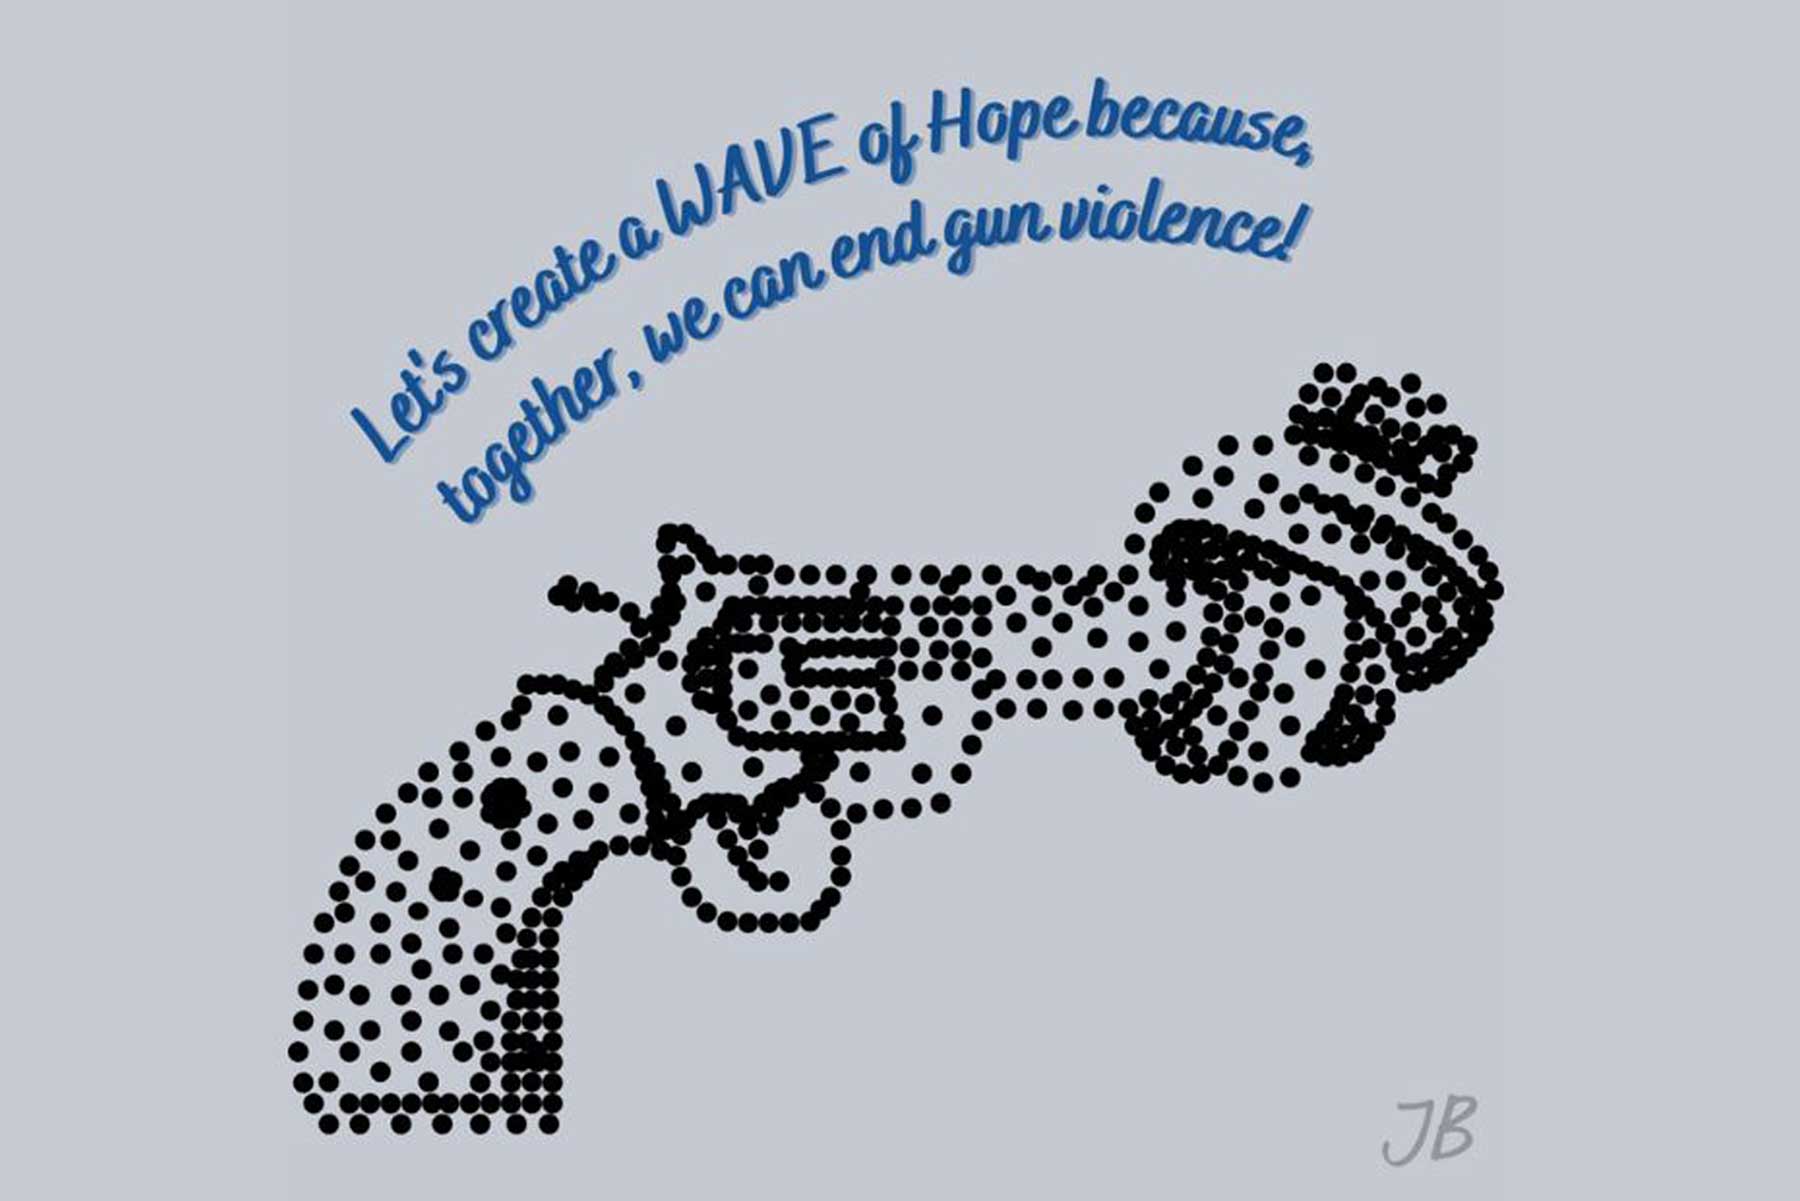 graphic of a pistol barrel tied in a knot with the words "Let's create a WAVE of hope together we can end gun violence"